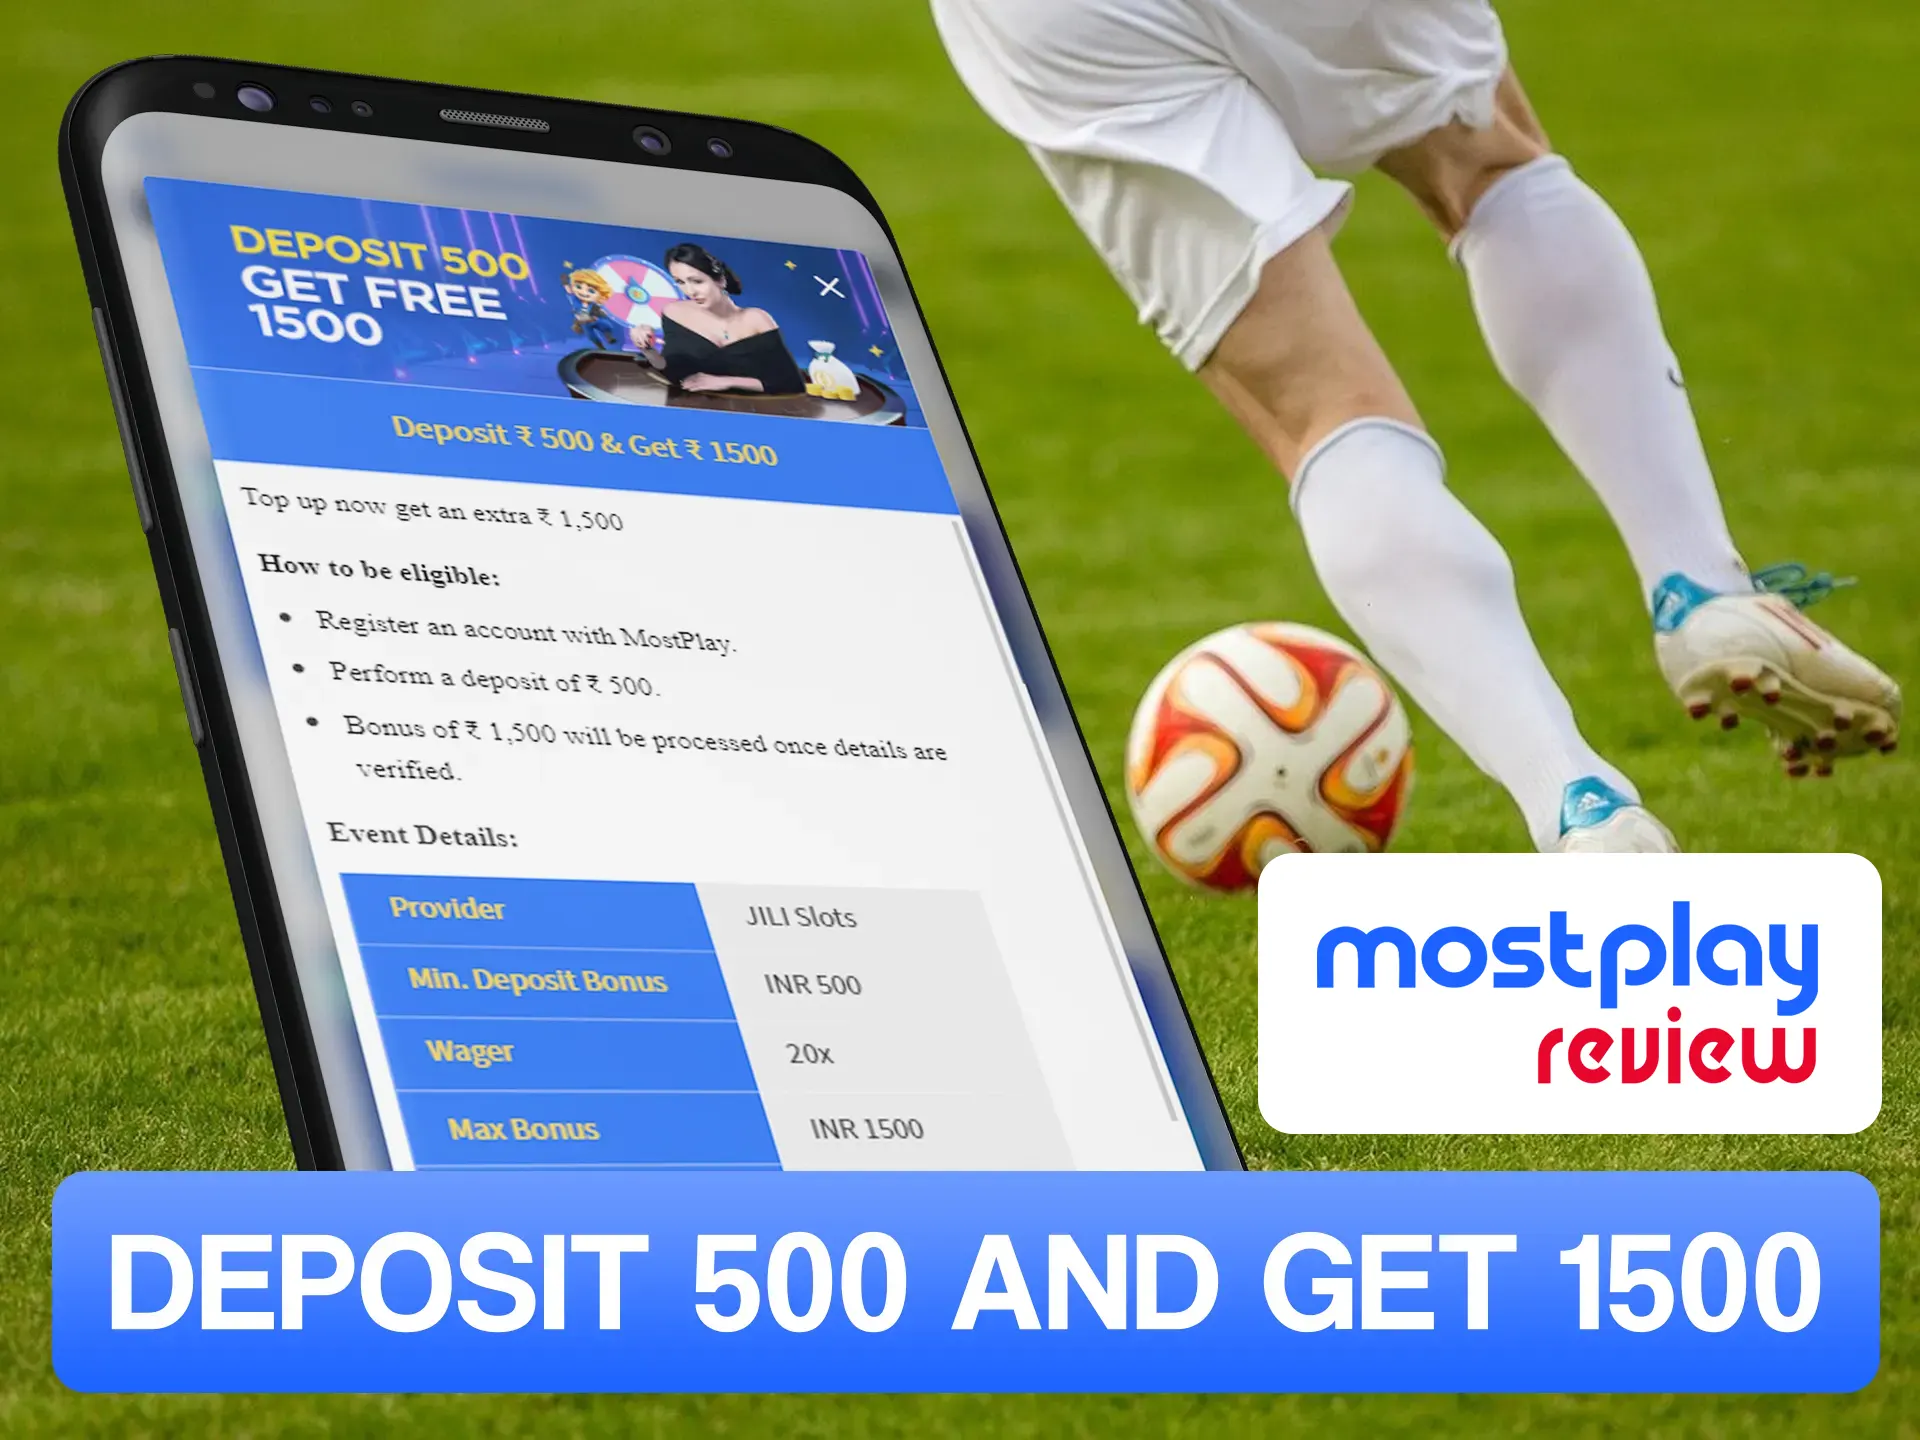 Get your Mostplay deposit after succesfull deposit.